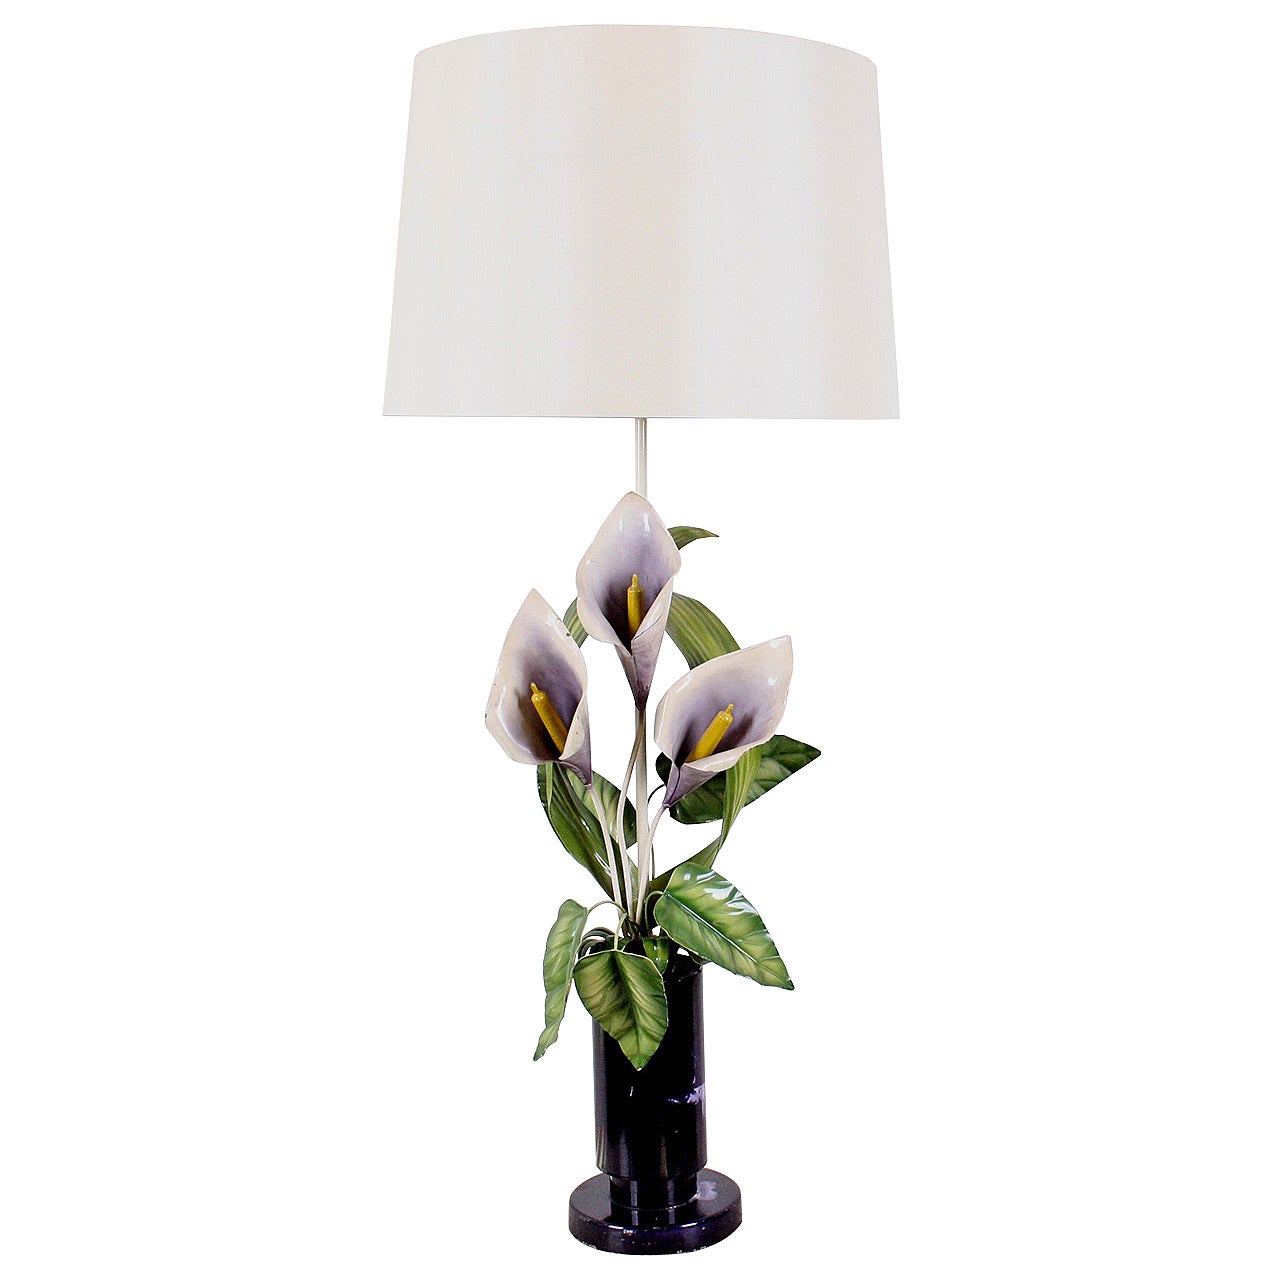 Hand-Crafted Flower Lamp Imitation of Lilies, 20th Century